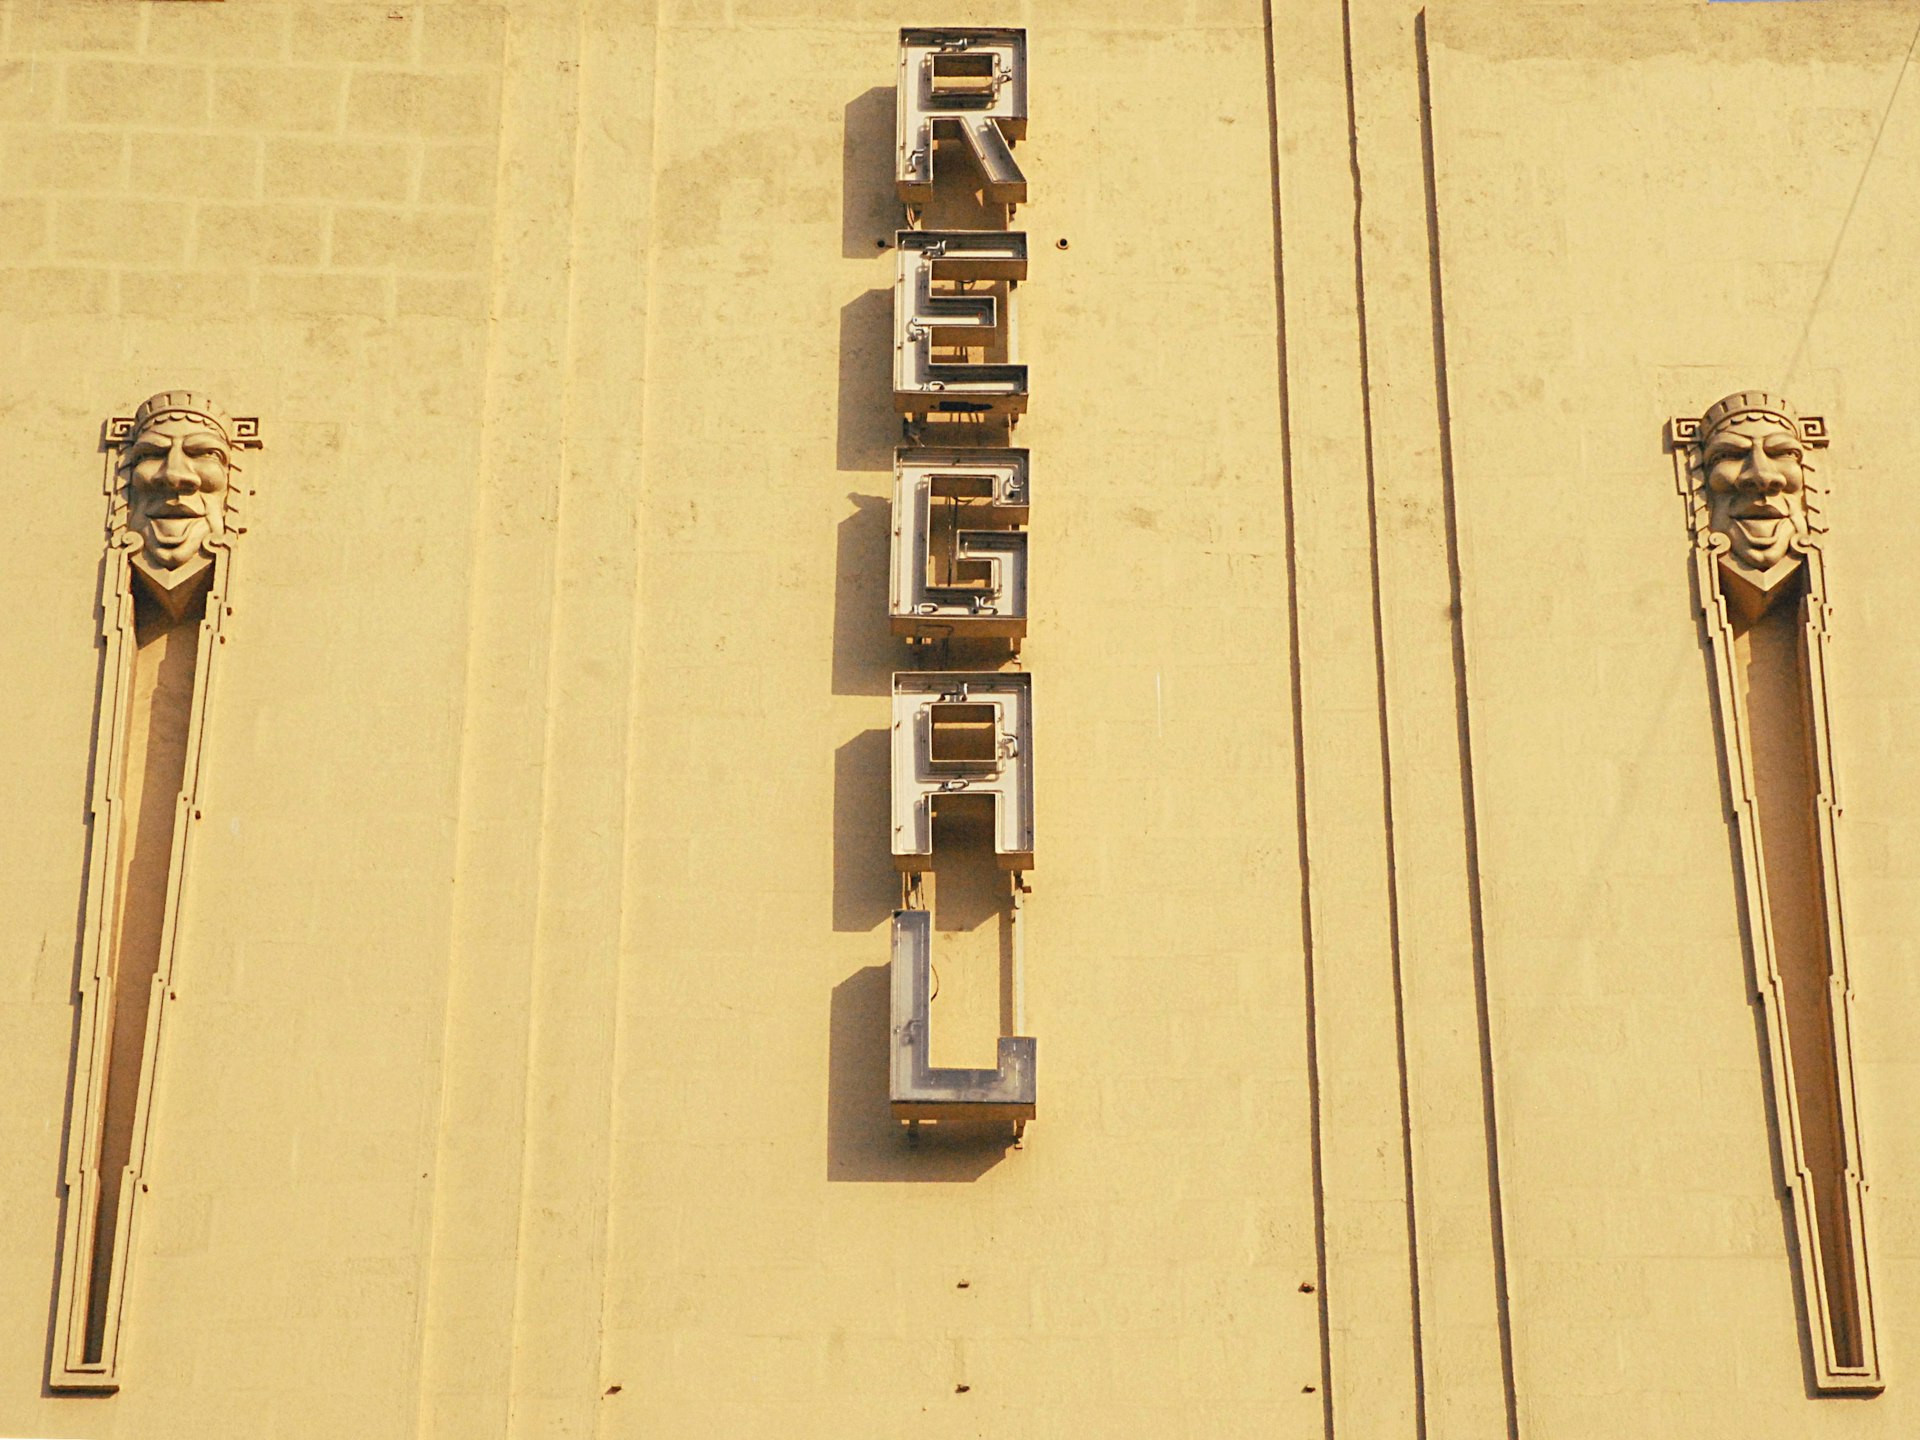 Classic Art Deco motifs on the frontage of the Regal Cinema, Colaba © Joe Bindloss / Lonely Planet